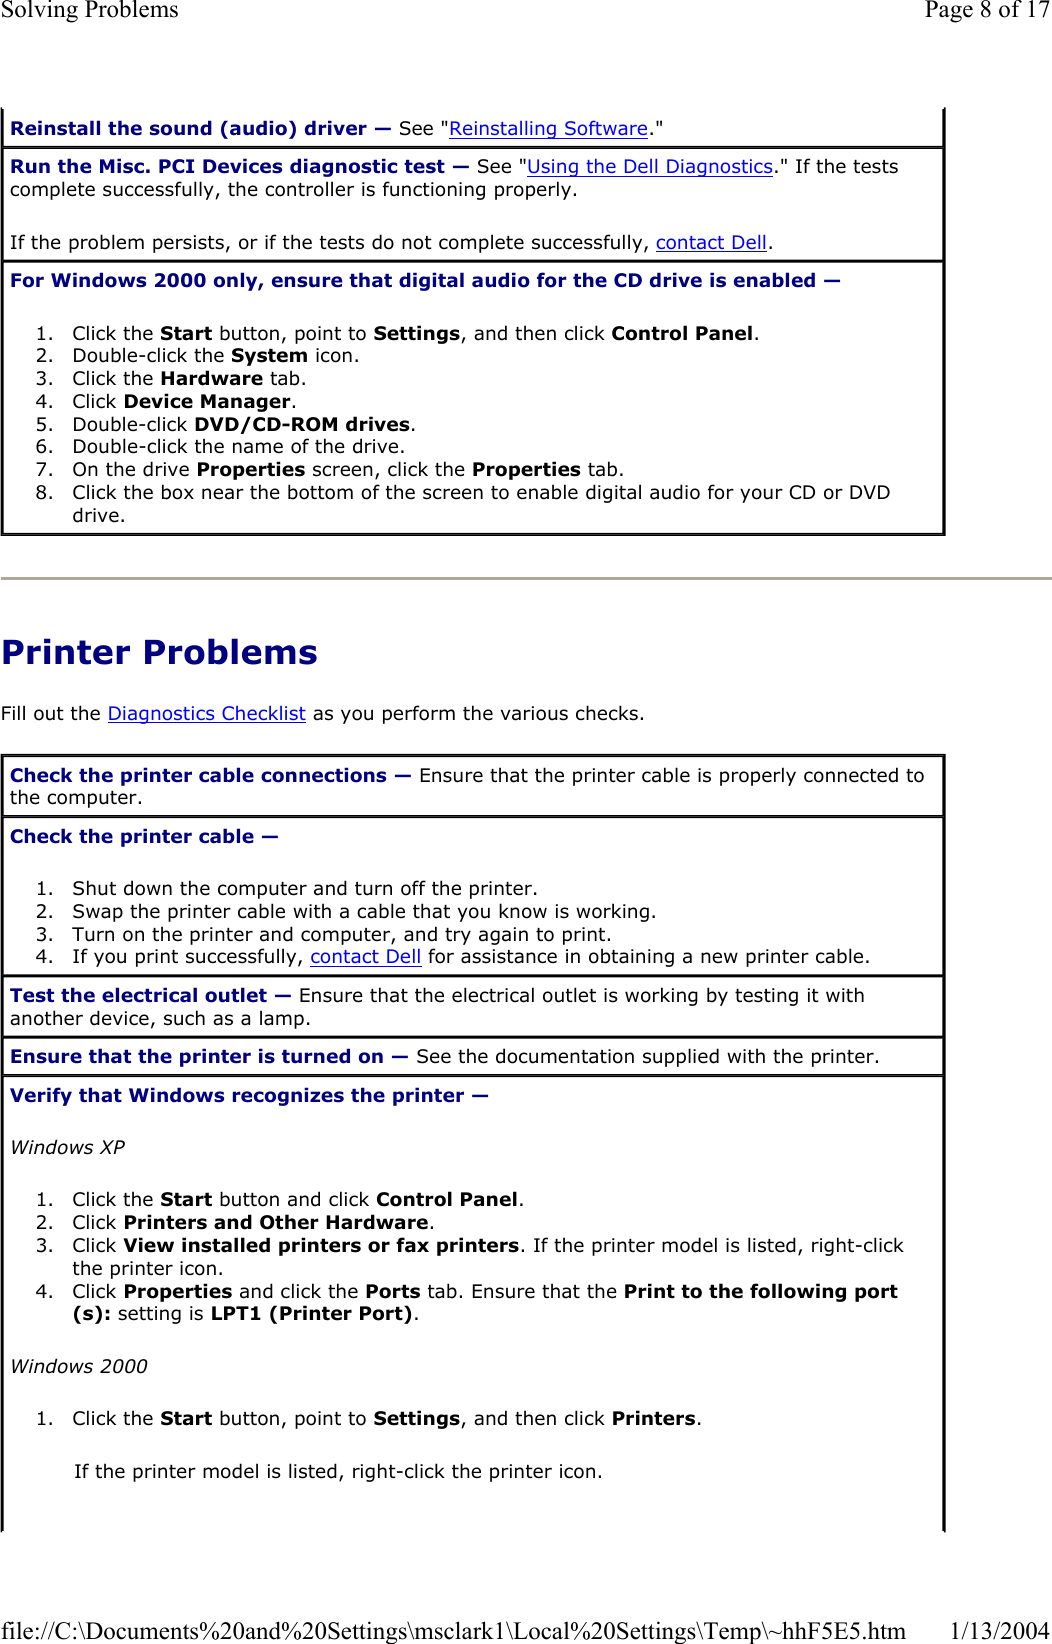 Printer Problems Fill out the Diagnostics Checklist as you perform the various checks. Reinstall the sound (audio) driver — See &quot;Reinstalling Software.&quot; Run the Misc. PCI Devices diagnostic test — See &quot;Using the Dell Diagnostics.&quot; If the tests complete successfully, the controller is functioning properly. If the problem persists, or if the tests do not complete successfully, contact Dell.For Windows 2000 only, ensure that digital audio for the CD drive is enabled —1. Click the Start button, point to Settings, and then click Control Panel.2. Double-click the System icon.  3. Click the Hardware tab.  4. Click Device Manager.5. Double-click DVD/CD-ROM drives.6. Double-click the name of the drive.  7. On the drive Properties screen, click the Properties tab.  8. Click the box near the bottom of the screen to enable digital audio for your CD or DVD drive.  Check the printer cable connections — Ensure that the printer cable is properly connected to the computer. Check the printer cable —1. Shut down the computer and turn off the printer.  2. Swap the printer cable with a cable that you know is working.  3. Turn on the printer and computer, and try again to print.  4. If you print successfully, contact Dell for assistance in obtaining a new printer cable.  Test the electrical outlet — Ensure that the electrical outlet is working by testing it with another device, such as a lamp. Ensure that the printer is turned on — See the documentation supplied with the printer. Verify that Windows recognizes the printer —Windows XP1. Click the Start button and click Control Panel.2. Click Printers and Other Hardware.3. Click View installed printers or fax printers. If the printer model is listed, right-click the printer icon.  4. Click Properties and click the Ports tab. Ensure that the Print to the following port(s): setting is LPT1 (Printer Port).Windows 20001. Click the Start button, point to Settings, and then click Printers.If the printer model is listed, right-click the printer icon. Page 8 of 17Solving Problems1/13/2004file://C:\Documents%20and%20Settings\msclark1\Local%20Settings\Temp\~hhF5E5.htm